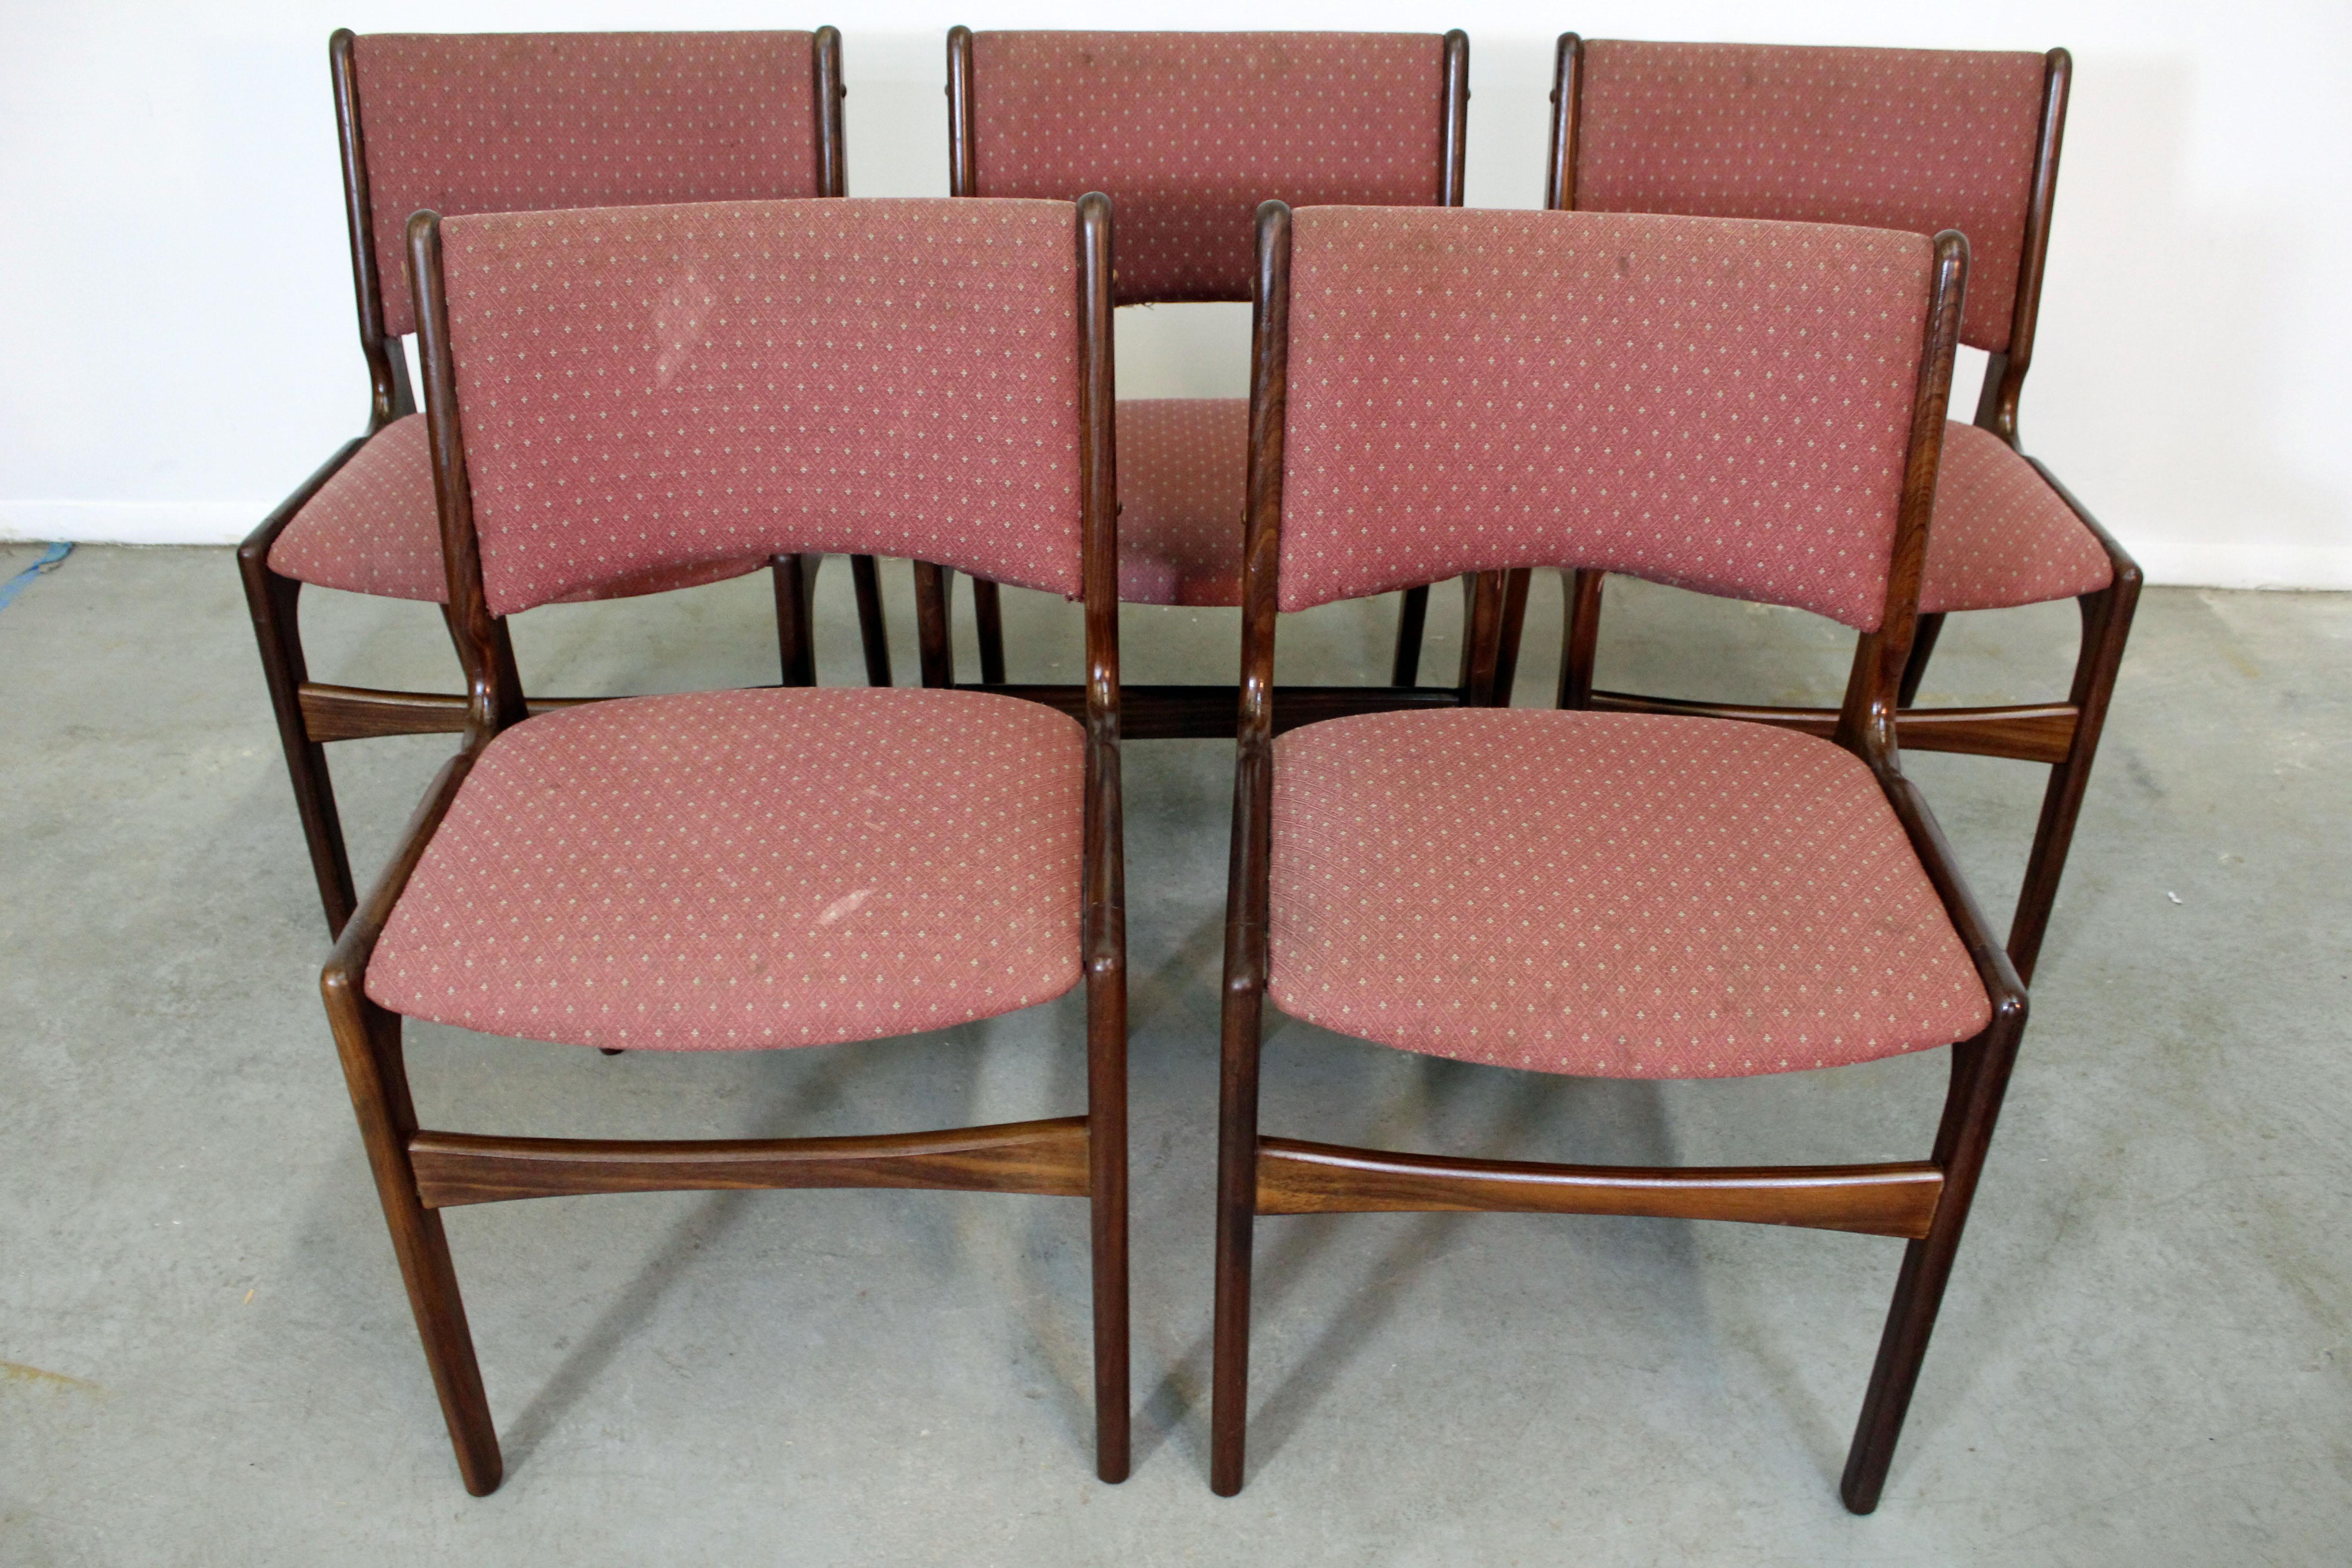 What a find. Offered is a set of 6 Danish modern teak side dining chairs by Henning Kjaernulf. They are structurally sound, in decent condition, showing some age wear (stains on upholstery, minor surface scratches, age wear-see photos). They are not